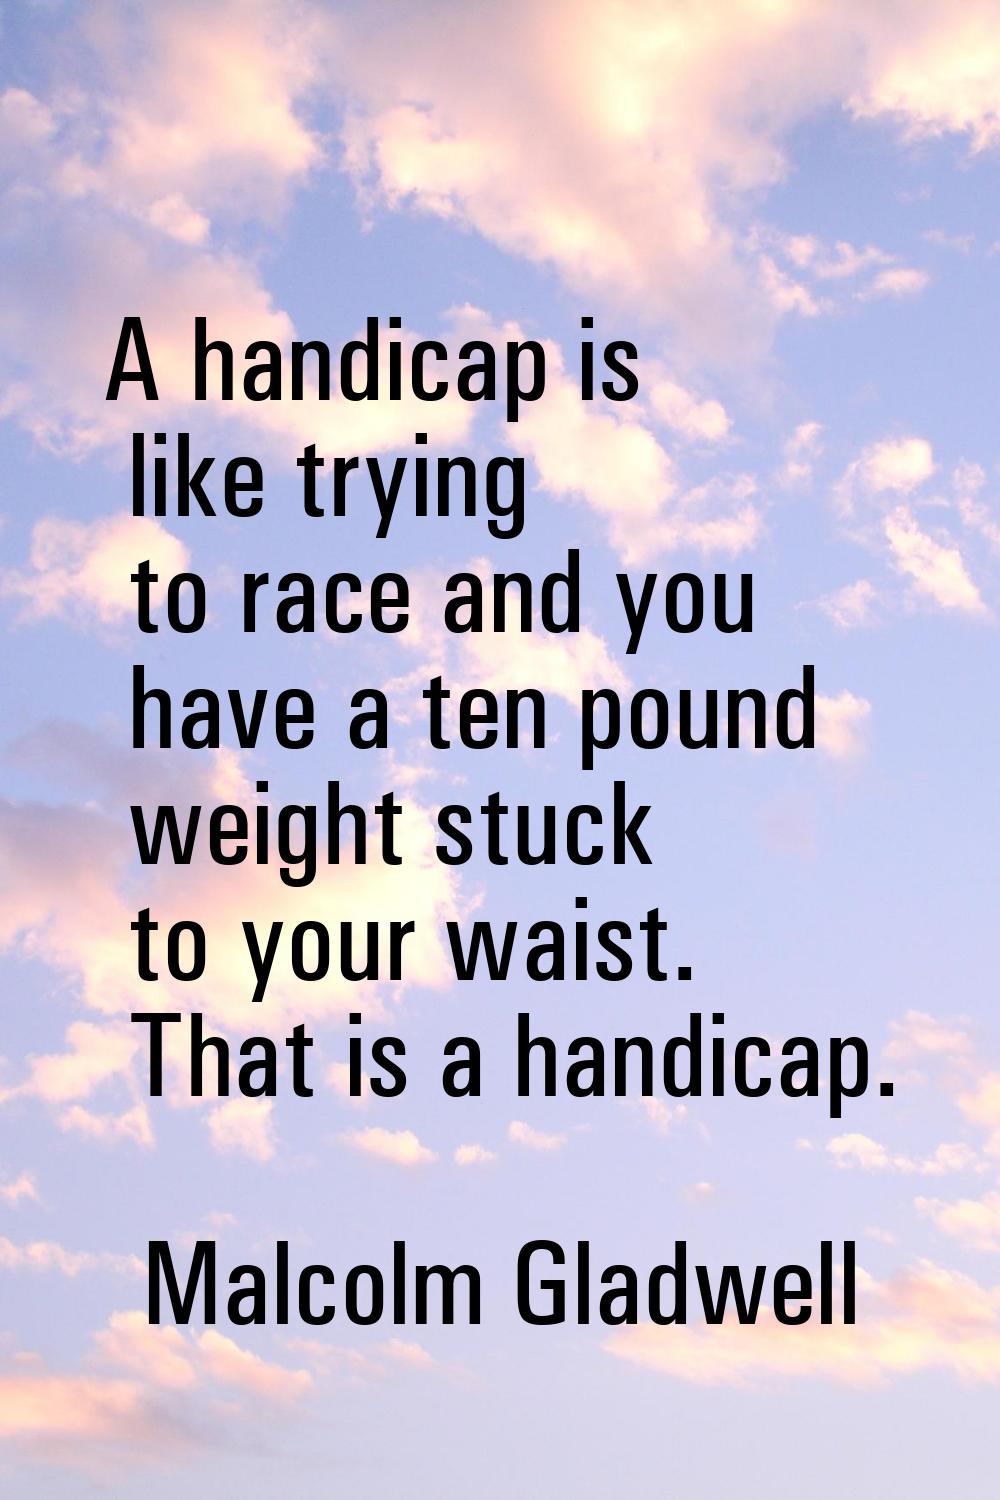 A handicap is like trying to race and you have a ten pound weight stuck to your waist. That is a ha